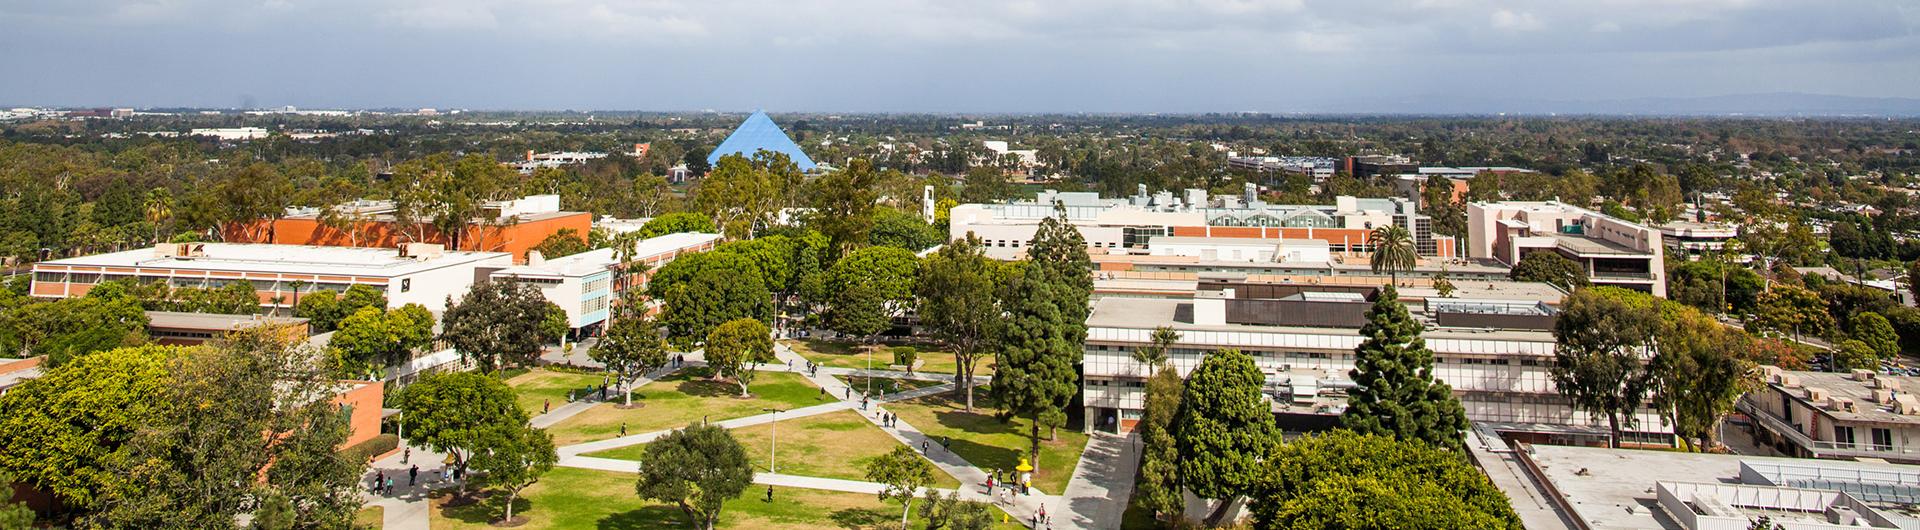  Aerial view of the CSULB campus